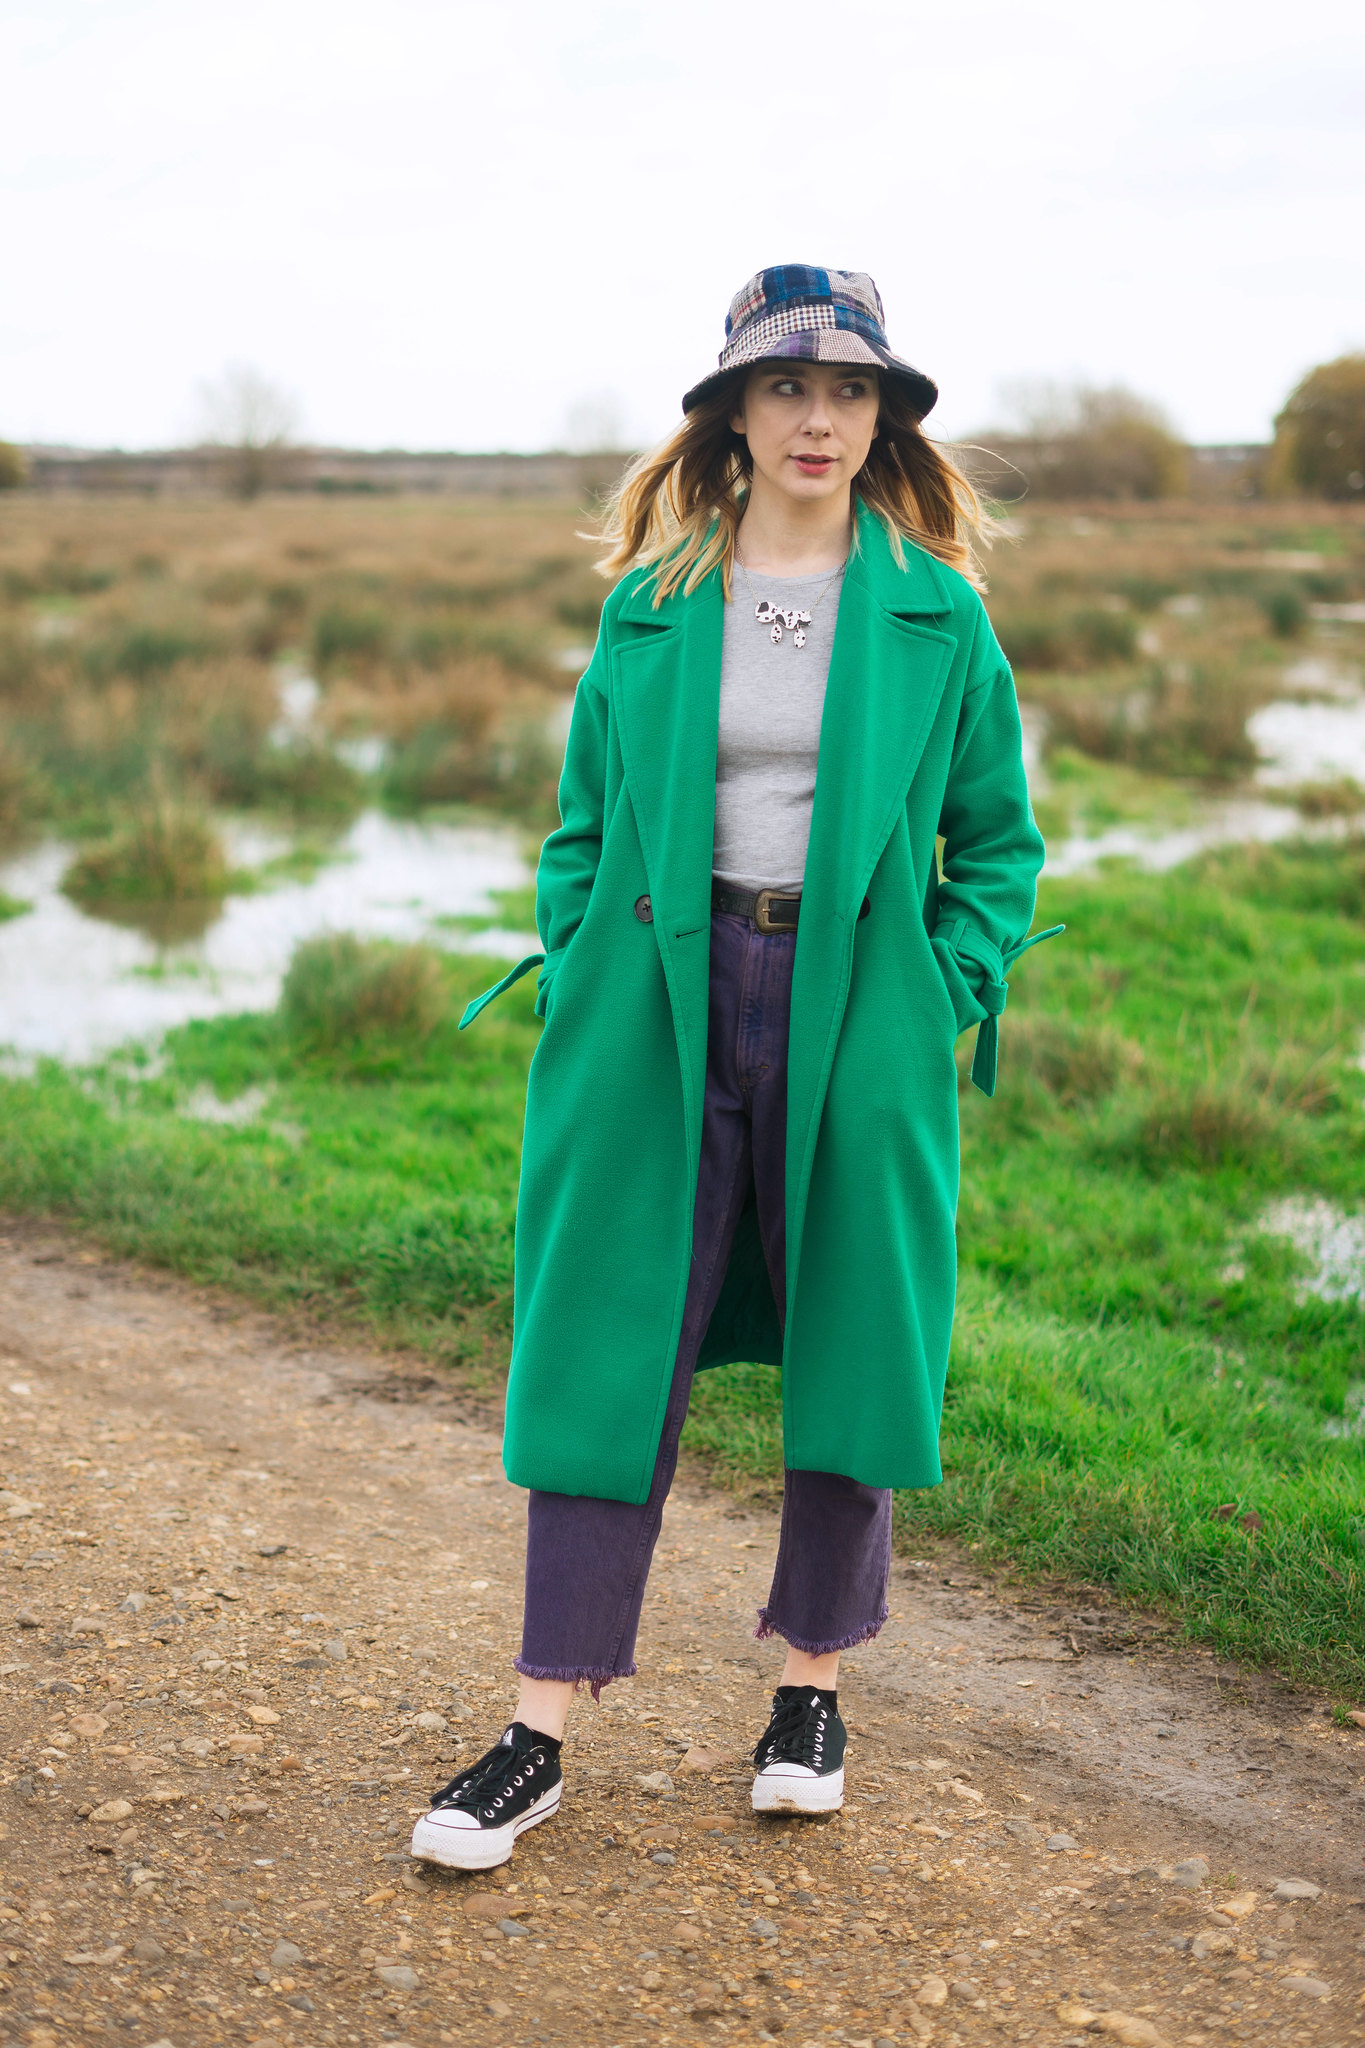 An picture of a white woman wearing a long green coat, a patchwork tweed bucket hat, high waist purple jeans and platform converse outside on a pathway in a field.